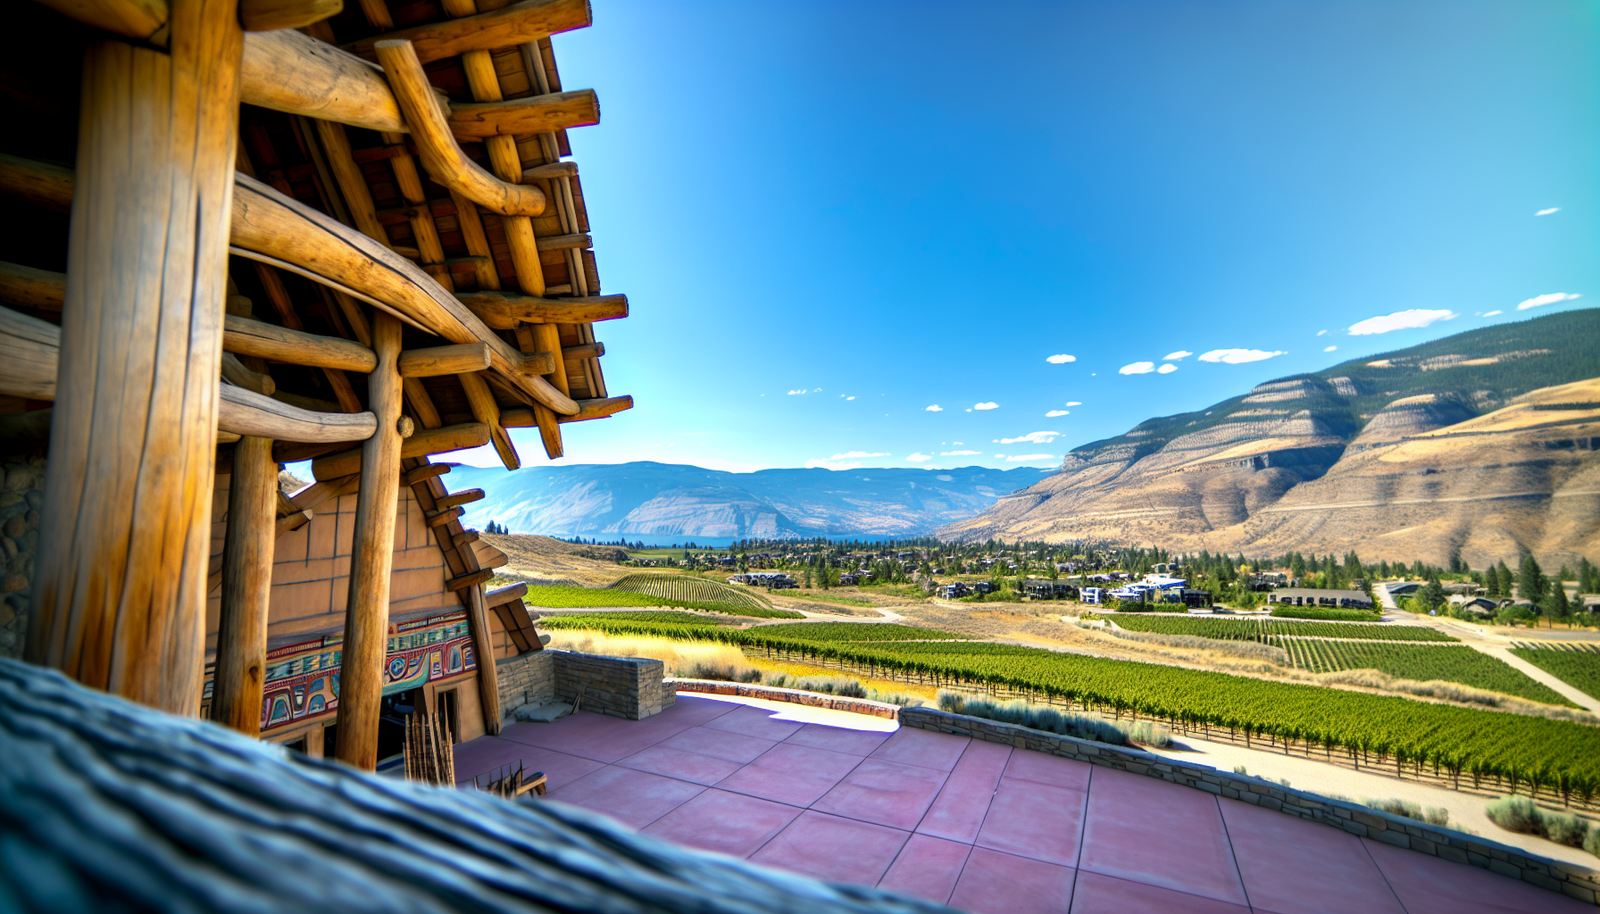 Cultural site in Okanagan Valley with indigenous heritage